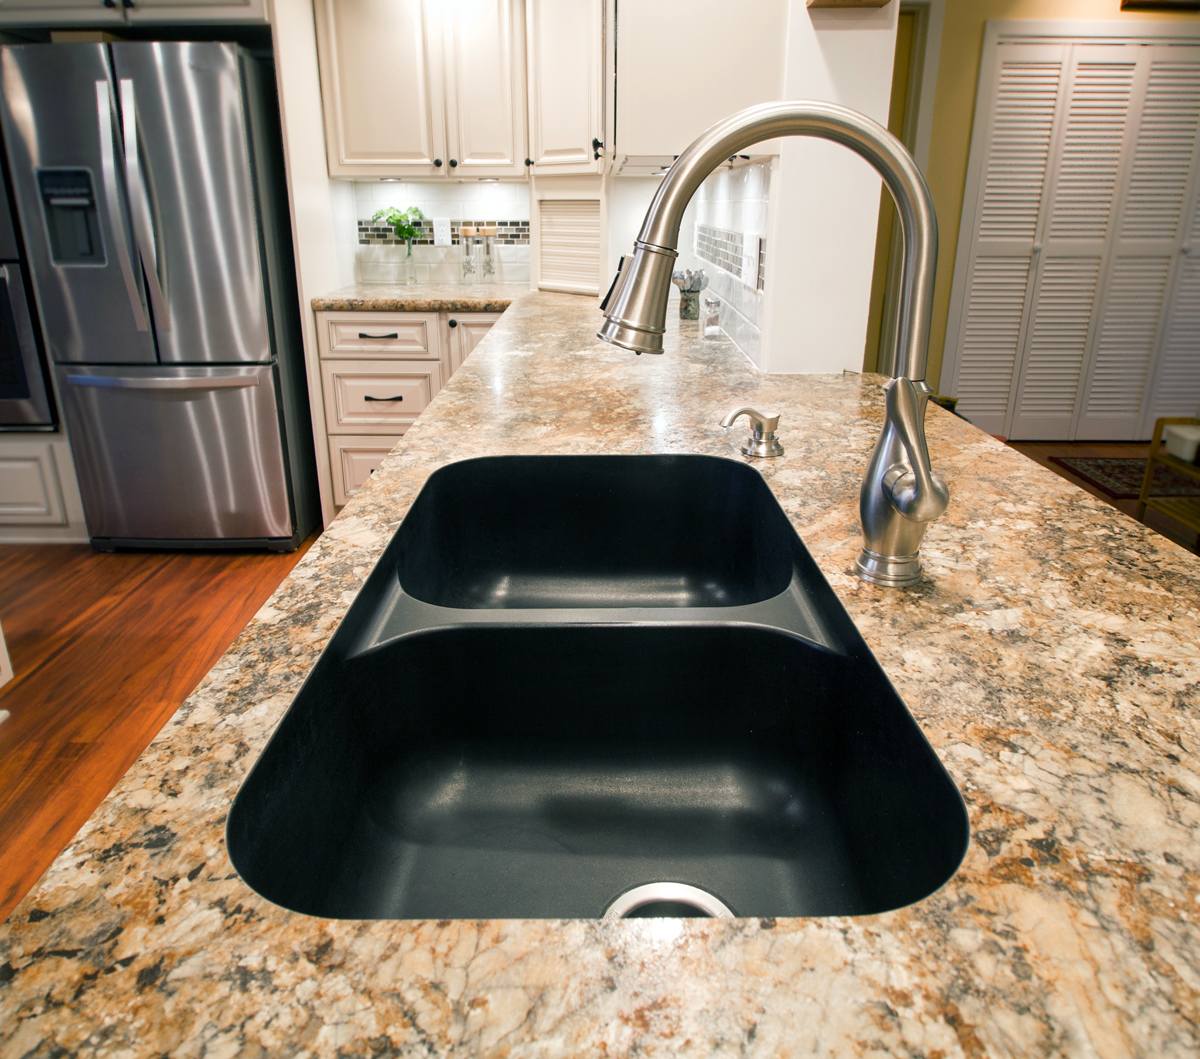 undermount,sink,faucet,countertop,counter,granite,custom,cabinet,spice,rack,cutting,board,drawers,remodel,install